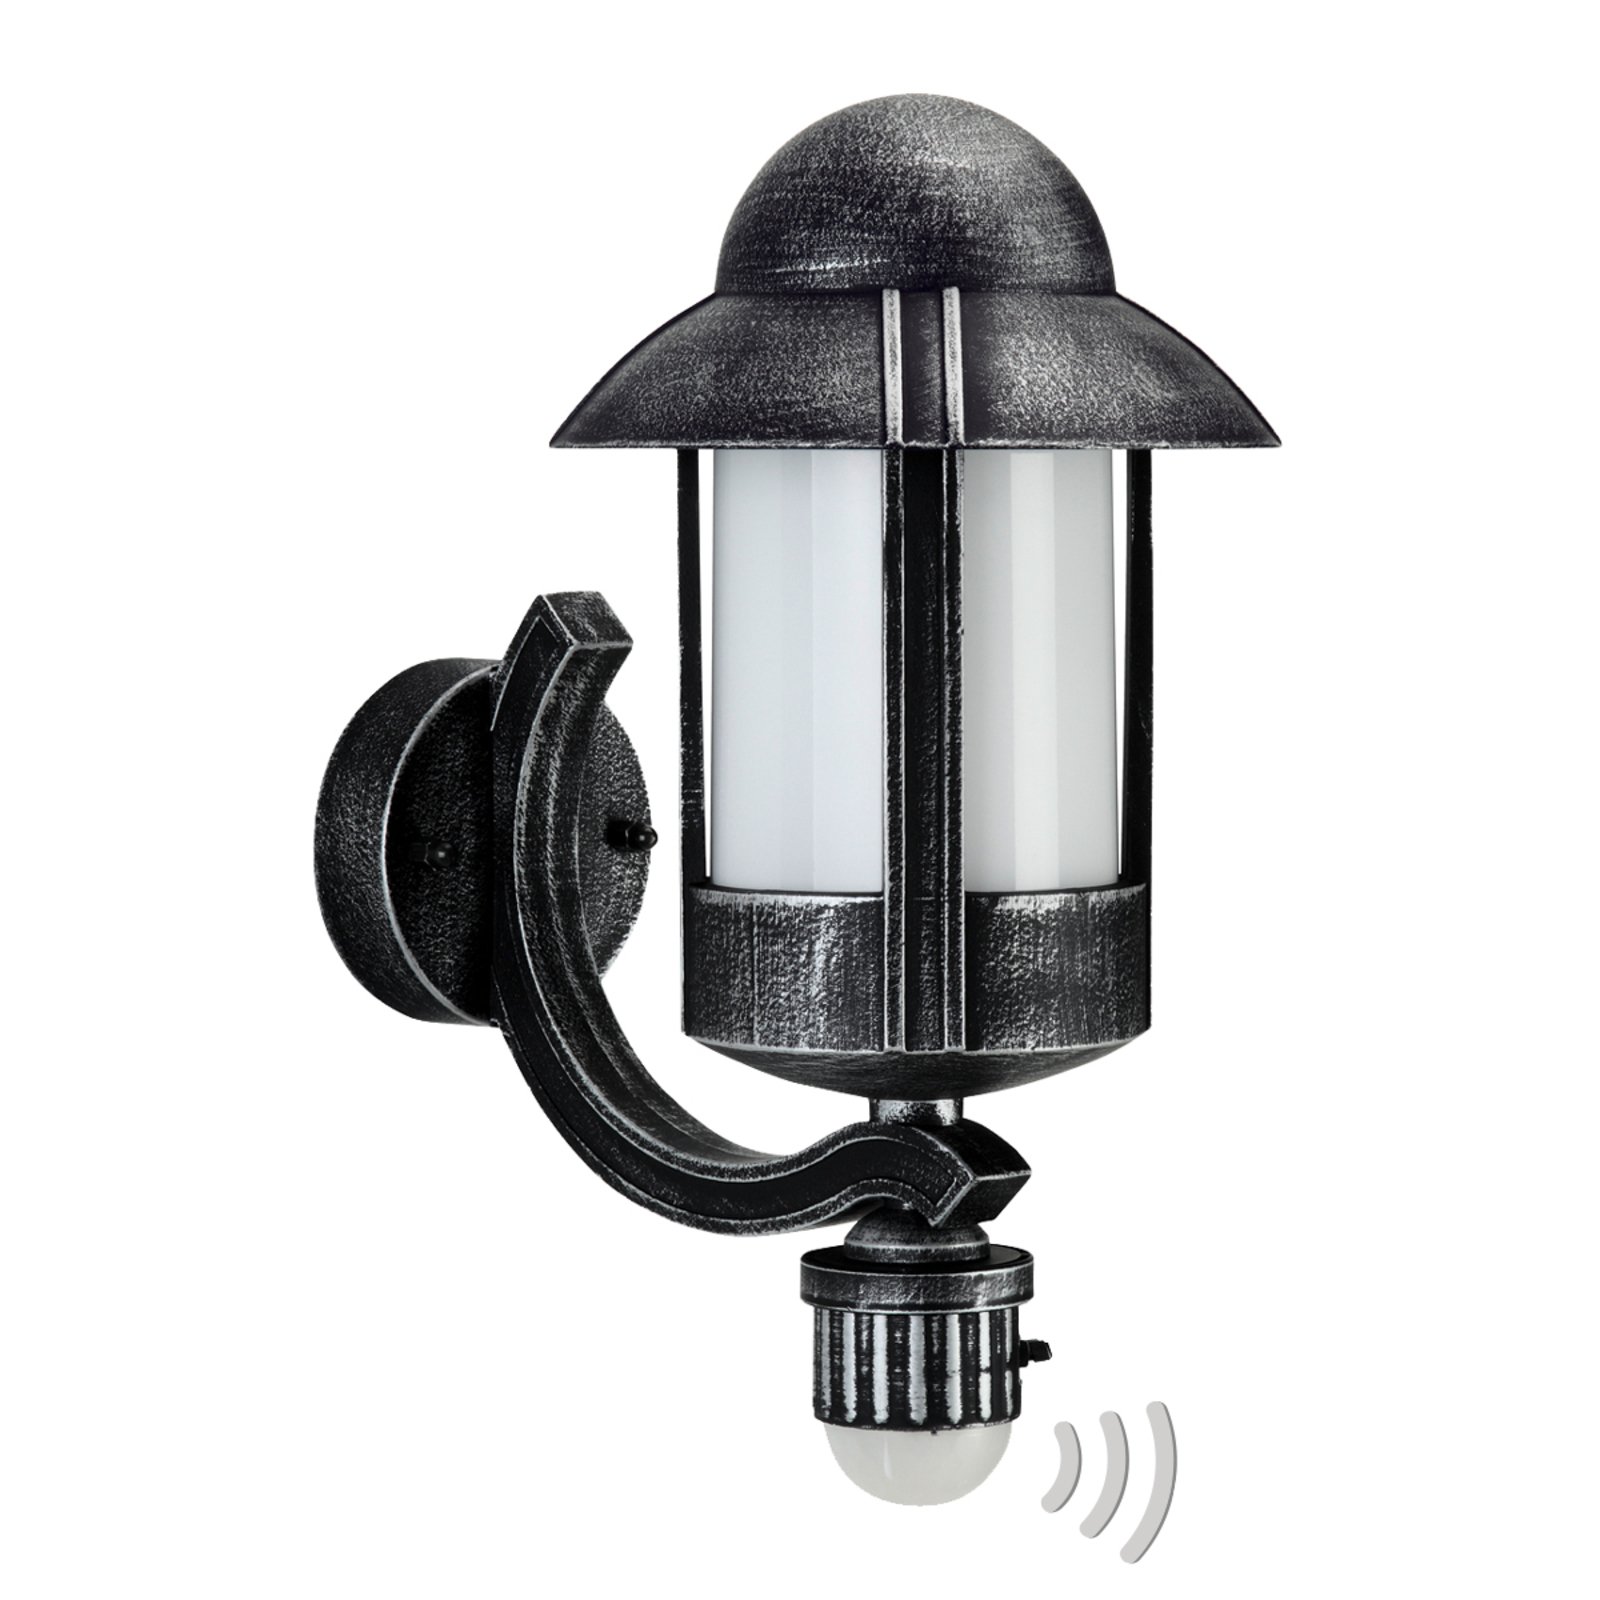 Country-style outdoor wall light Dorothee, black